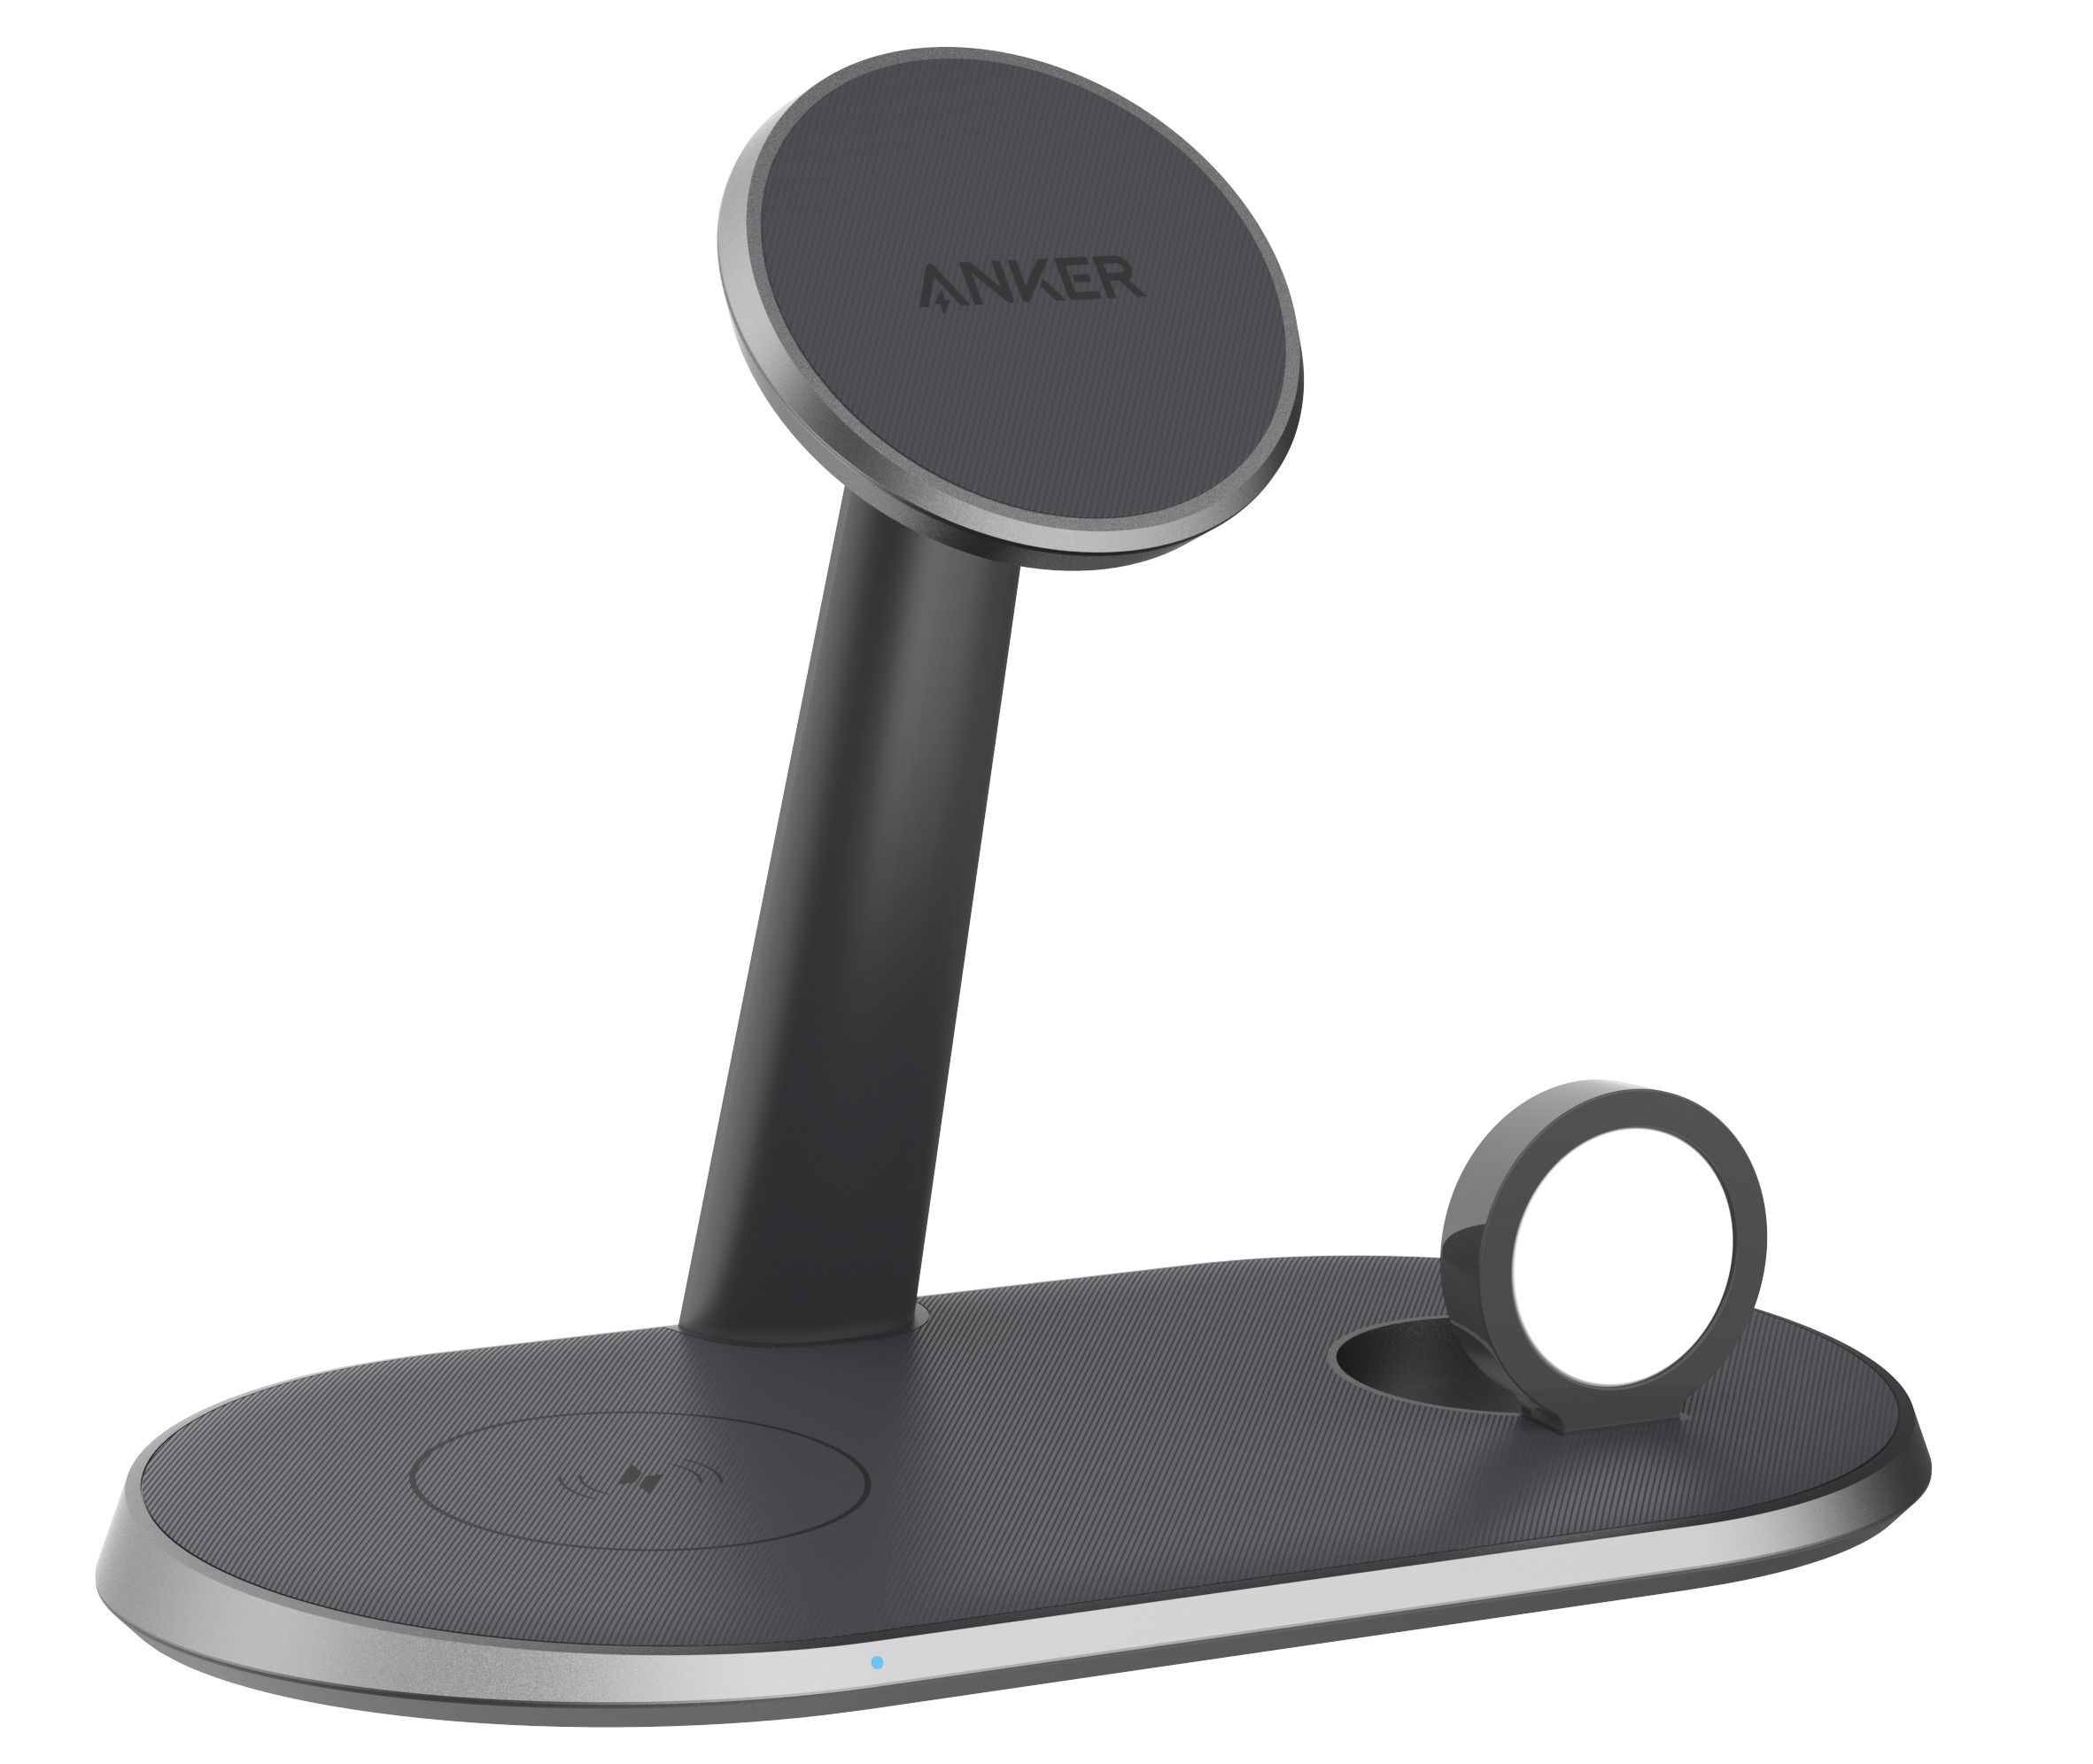 Anker 2-in-1 Magnetic Wireless Charging Stand. Anker POWERWAVE Magnetic 2-in-1 Stand White. POWERWAVE Magnetic Stand. POWERWAVE Magnetic 2-in-1 Stand купить. Anker magsafe